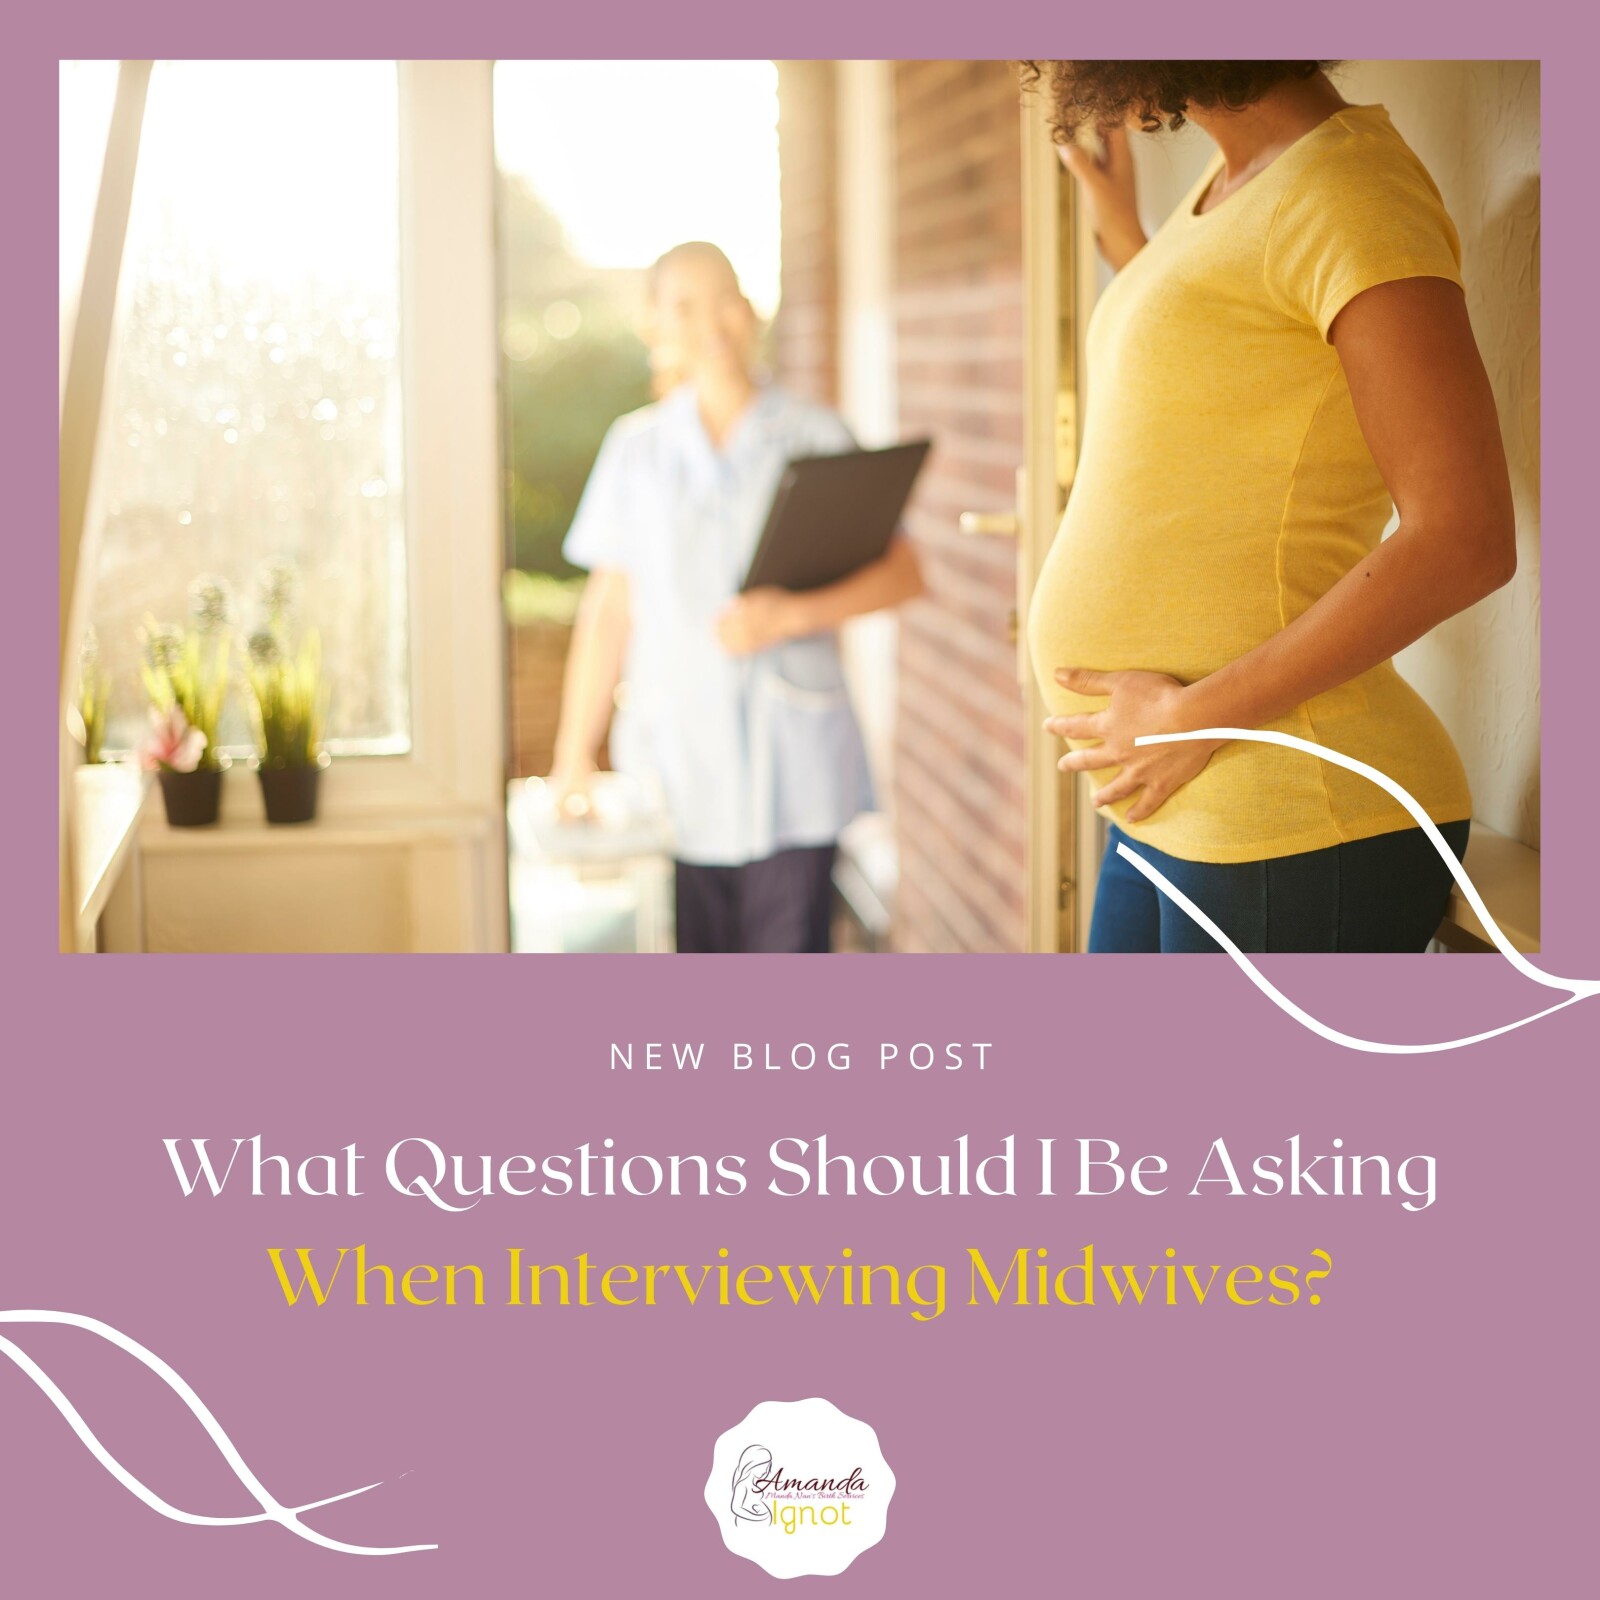 What Questions Should I Be Asking When Interviewing Midwives?